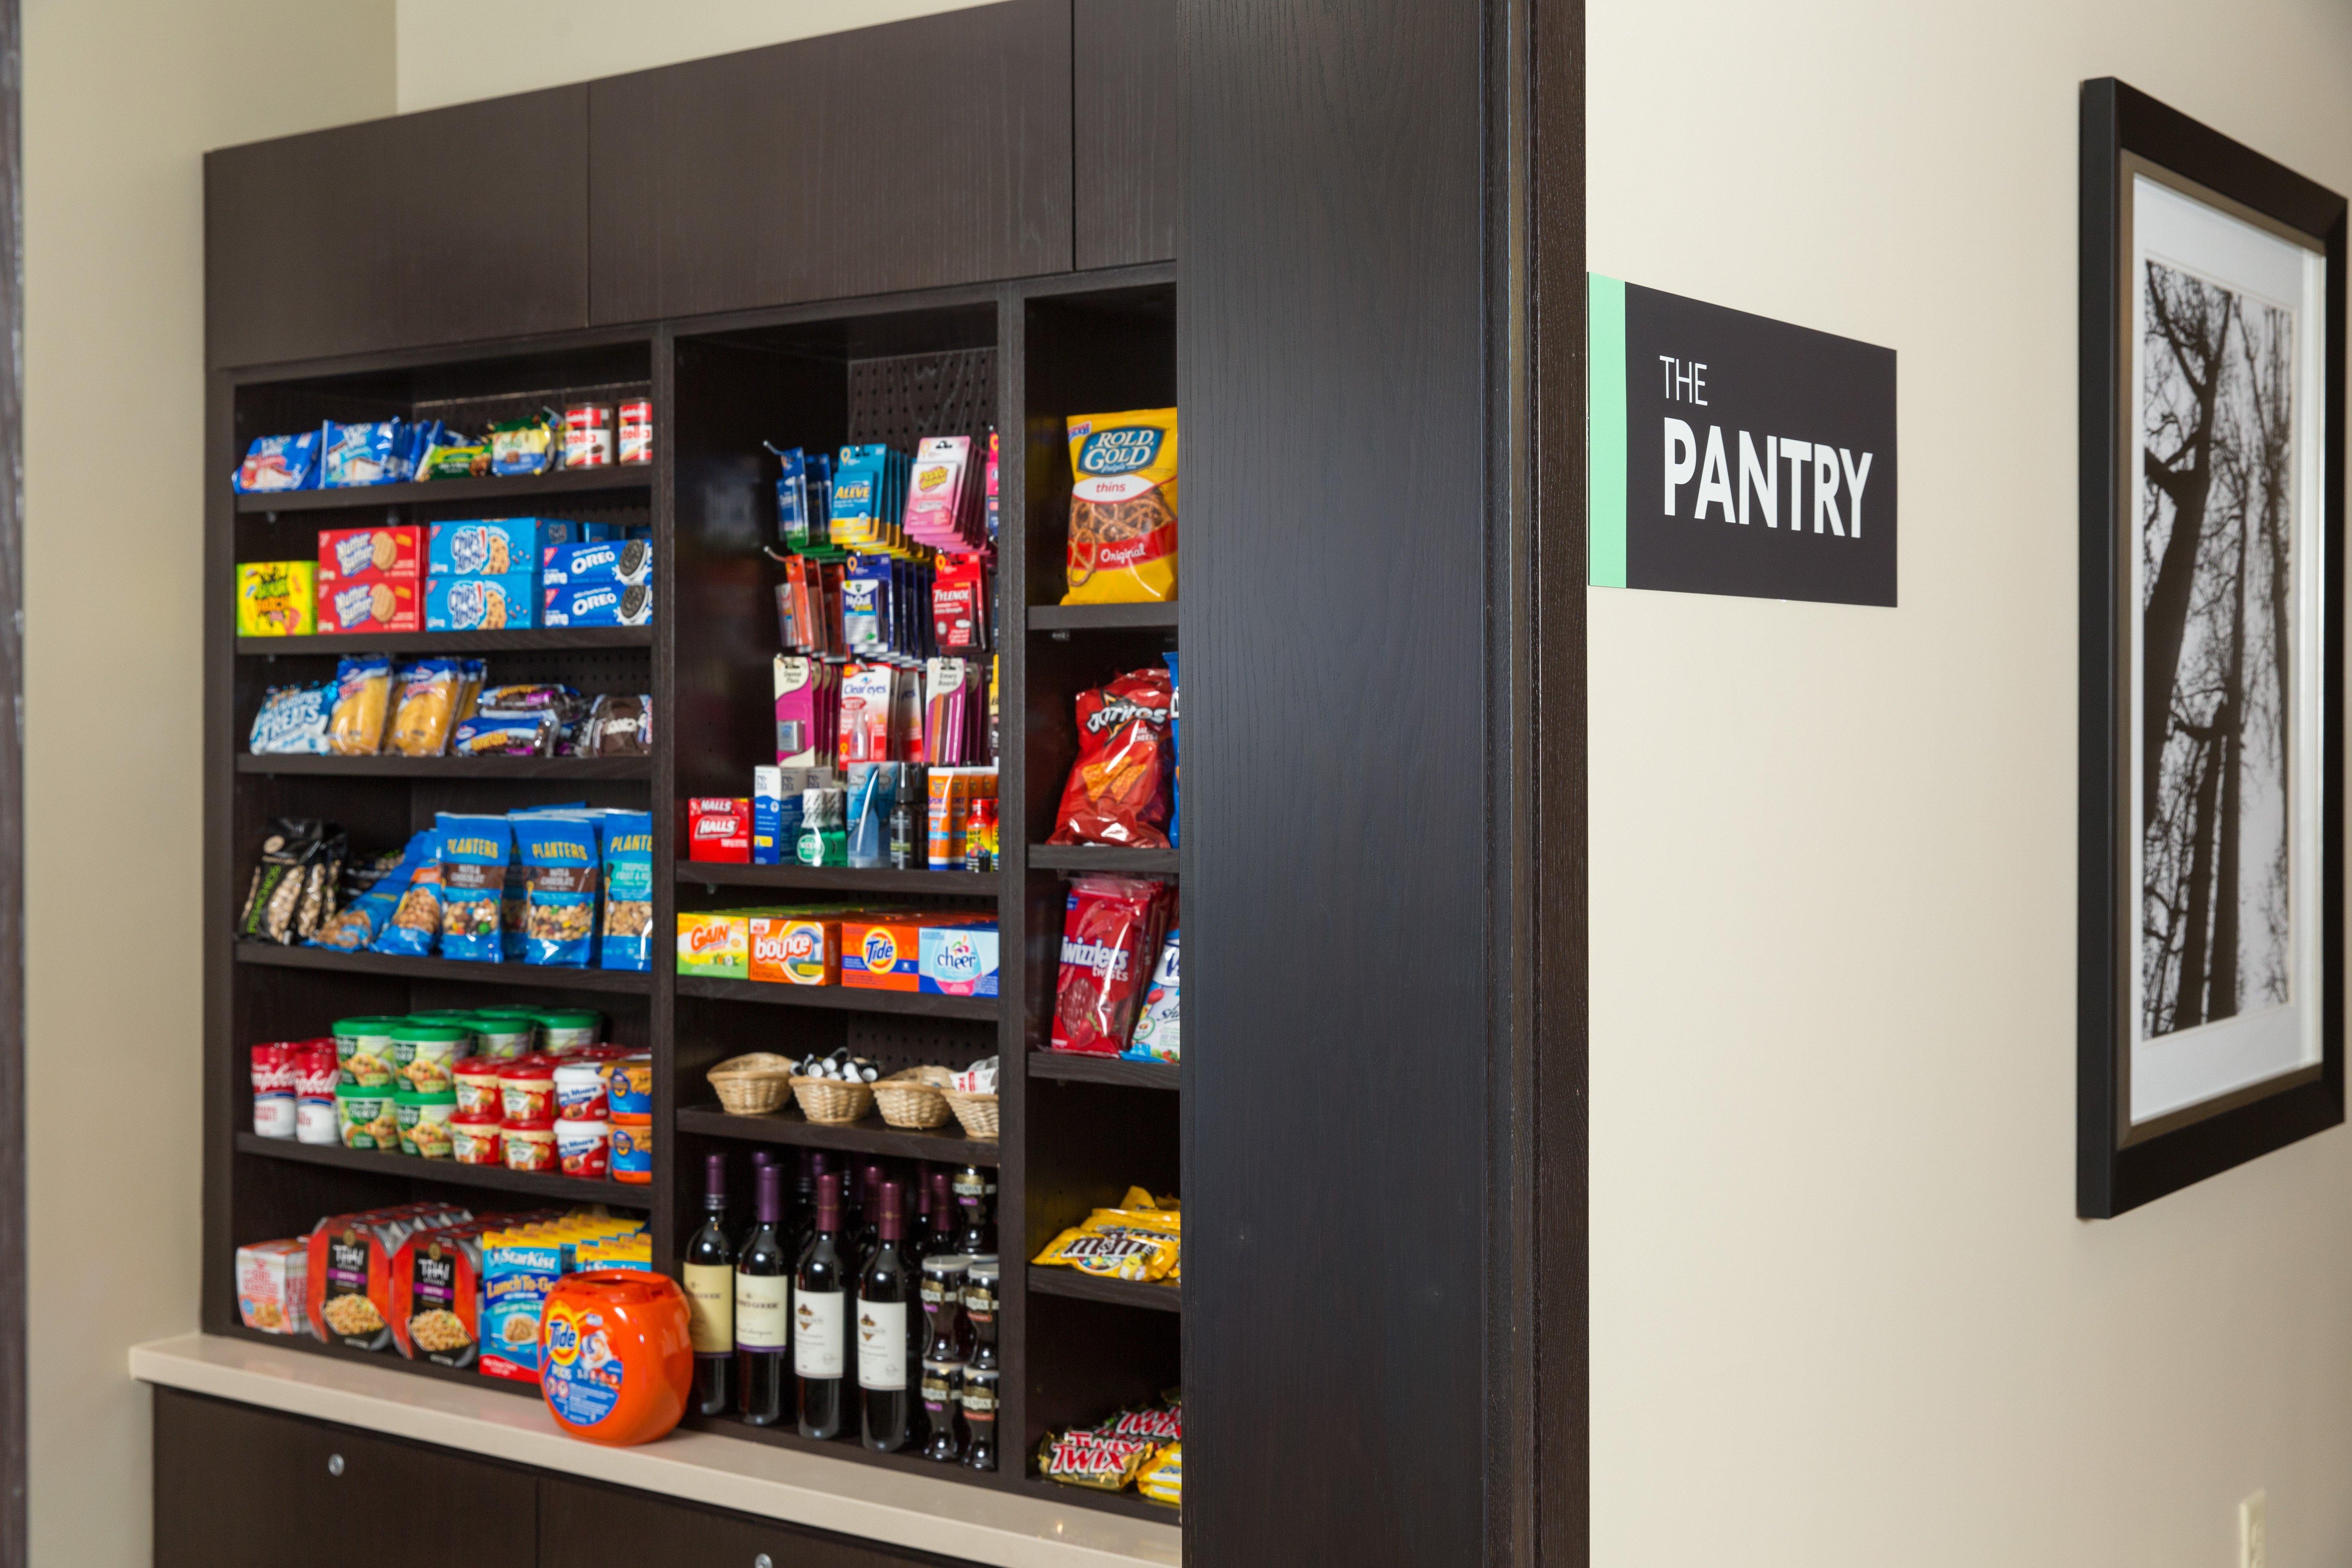 Our 24 hour Pantry has everything you need to enhance your stay.